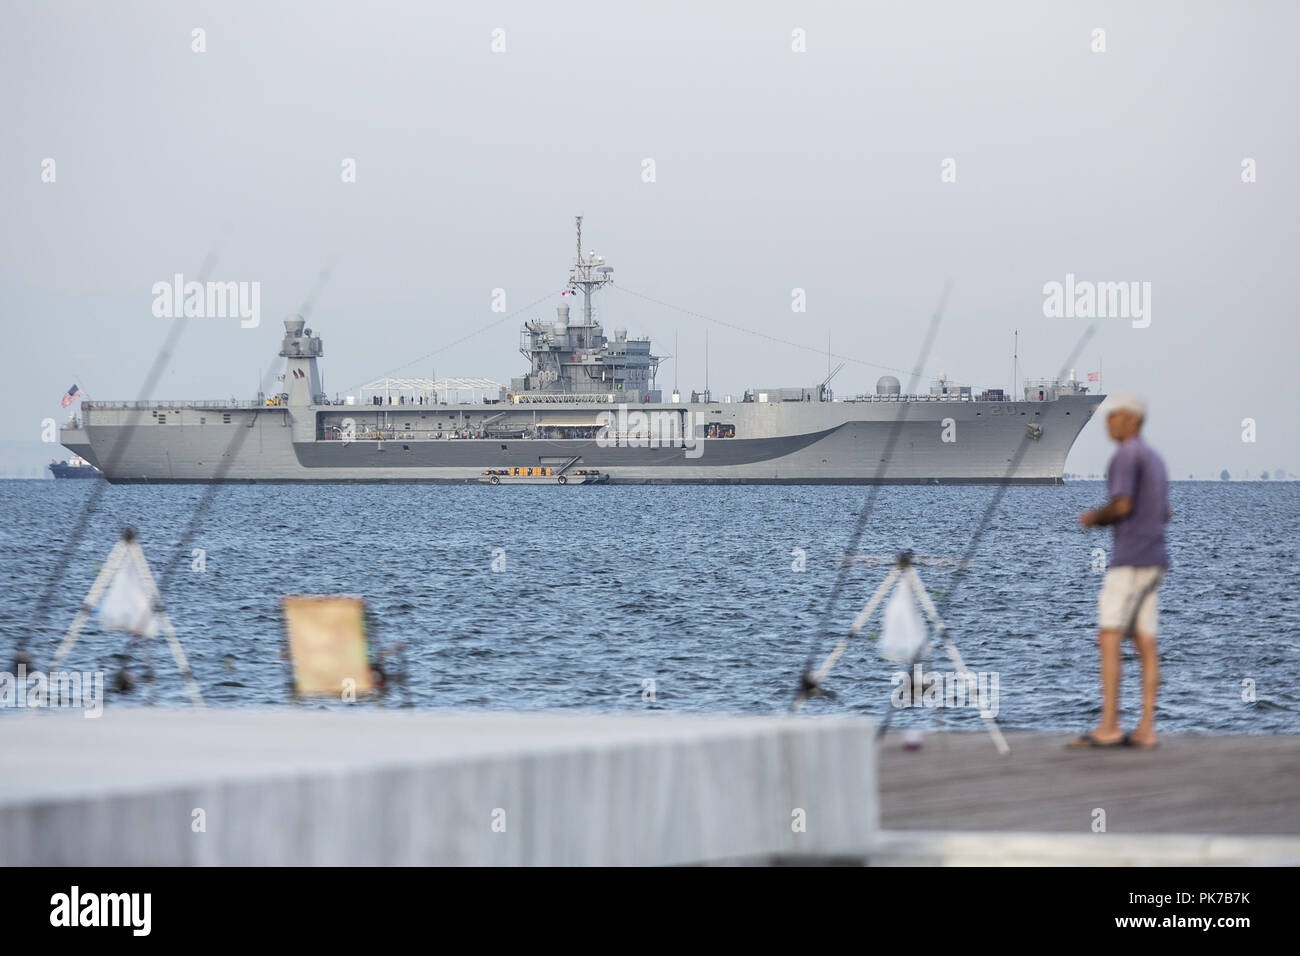 September 10, 2018 - Thessaloniki, Greece - A man fishes at the seafront of the city with the USS Mount Whitney seen at the background. USS Mount Whitney LCC-20 visits the northern Greek city of Thessaloniki during Thessaloniki International Trade Fair 2018, where USA participates as the honoured country this year. (Credit Image: © Giannis Papanikos/ZUMA Wire) Stock Photo